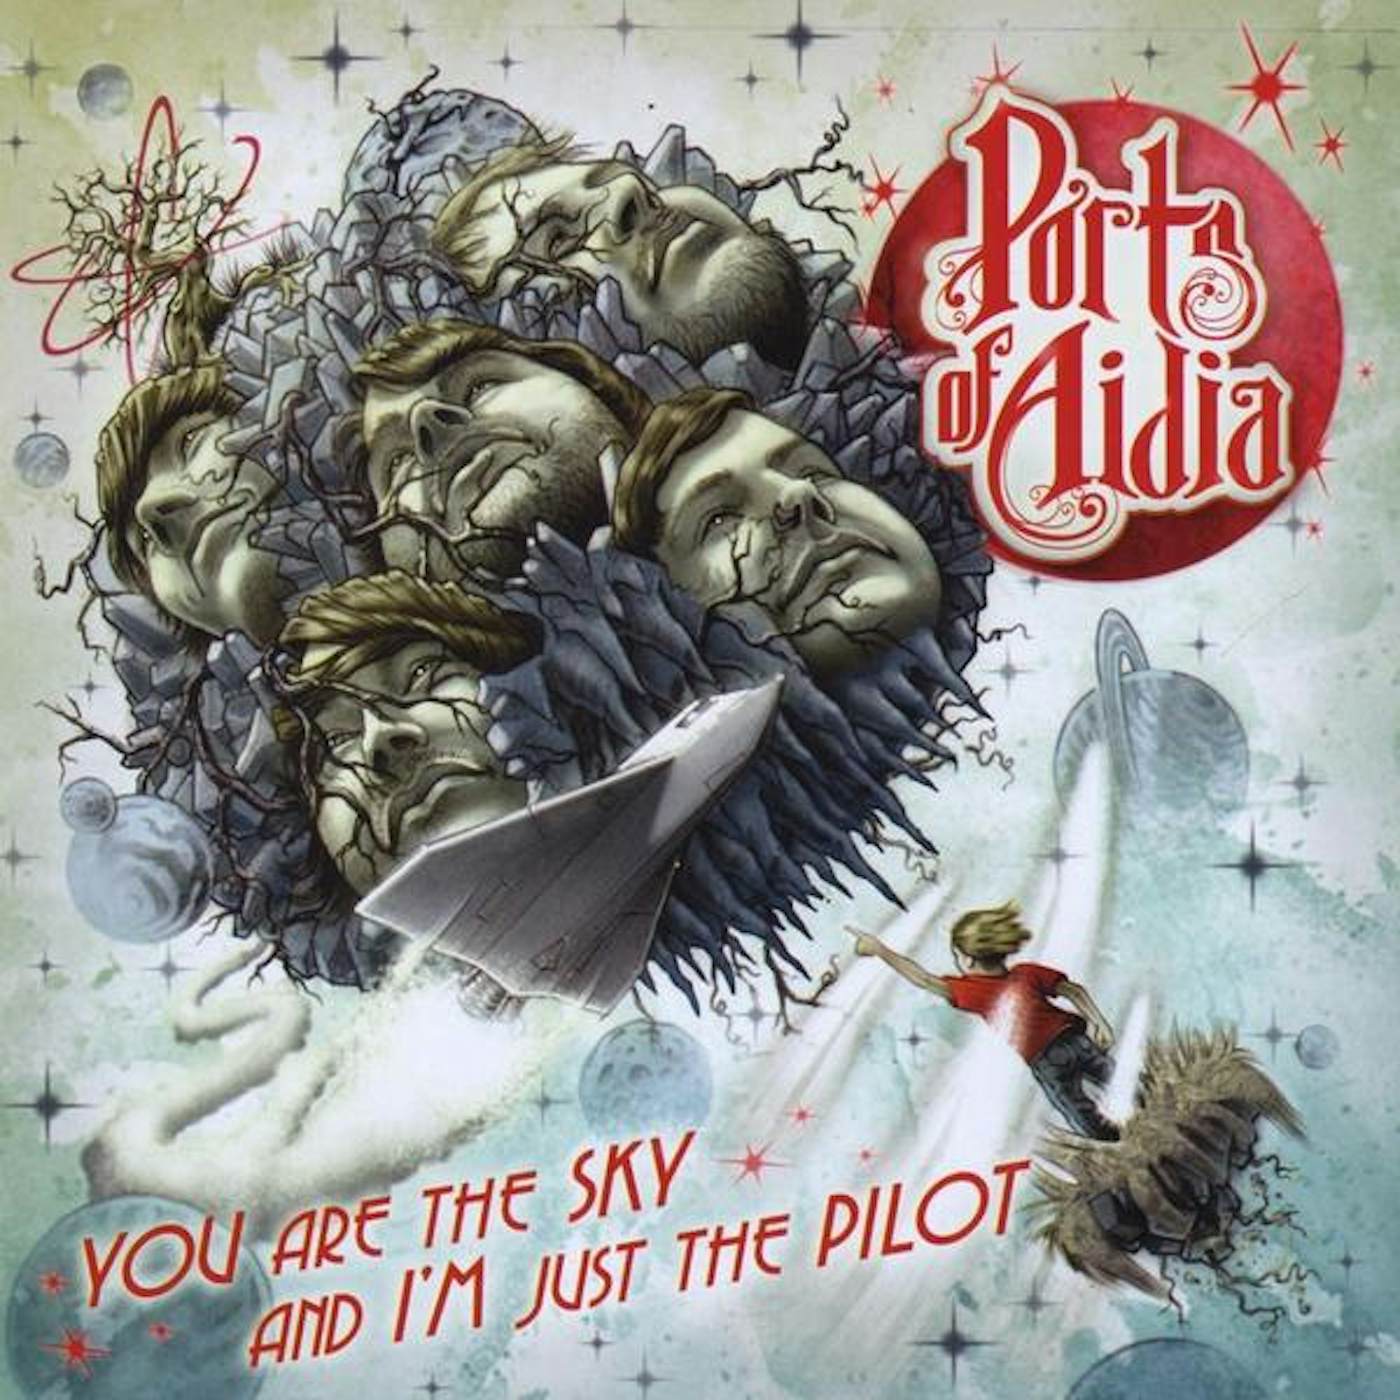 Ports Of Aidia YOU ARE THE SKY & I'M JUST THE PILOT CD